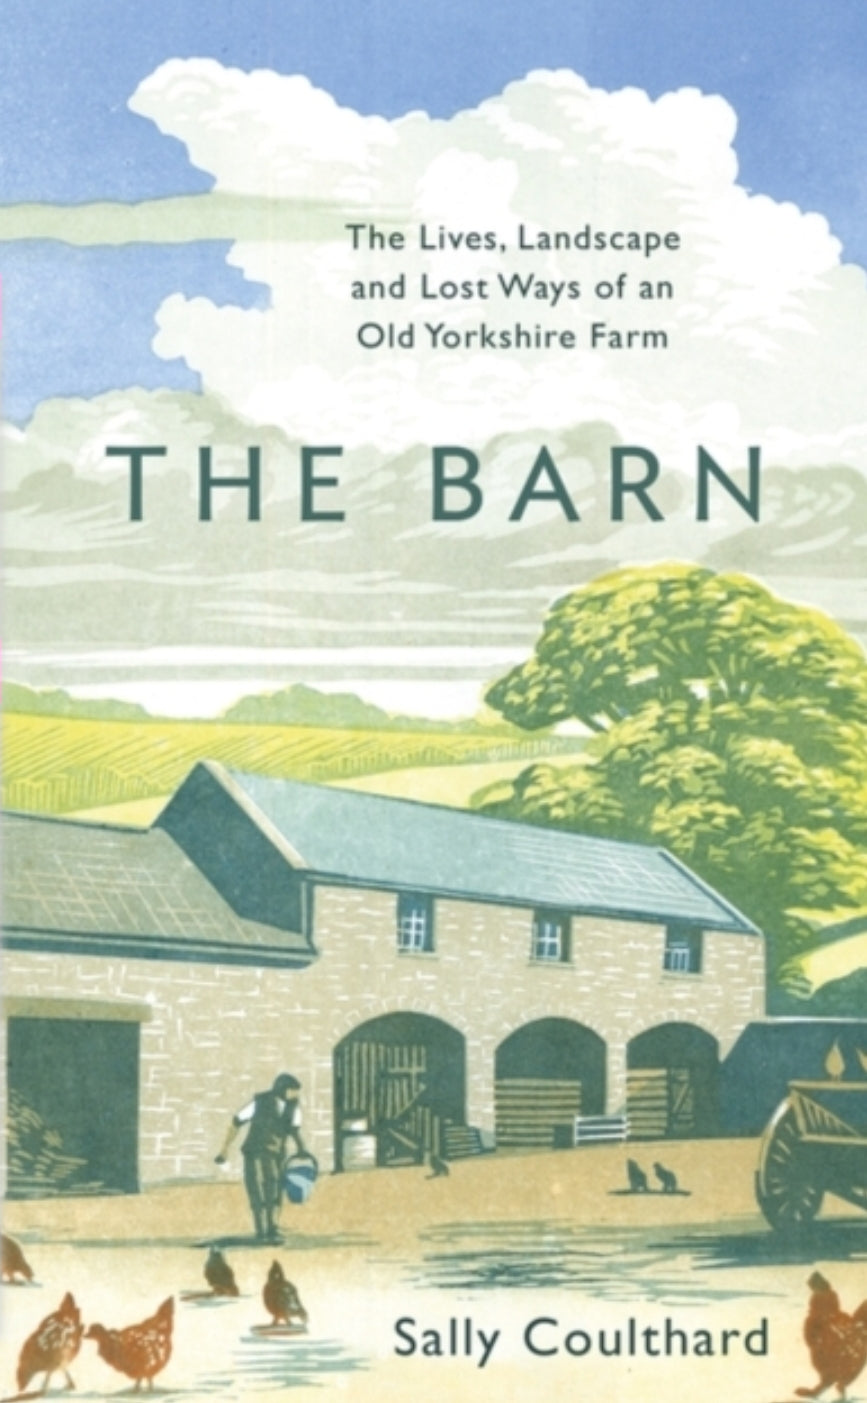 The Barn : The Lives, Landscape and Lost Ways of an Old Yorkshire Farm by Sally Coulthard (paperback)